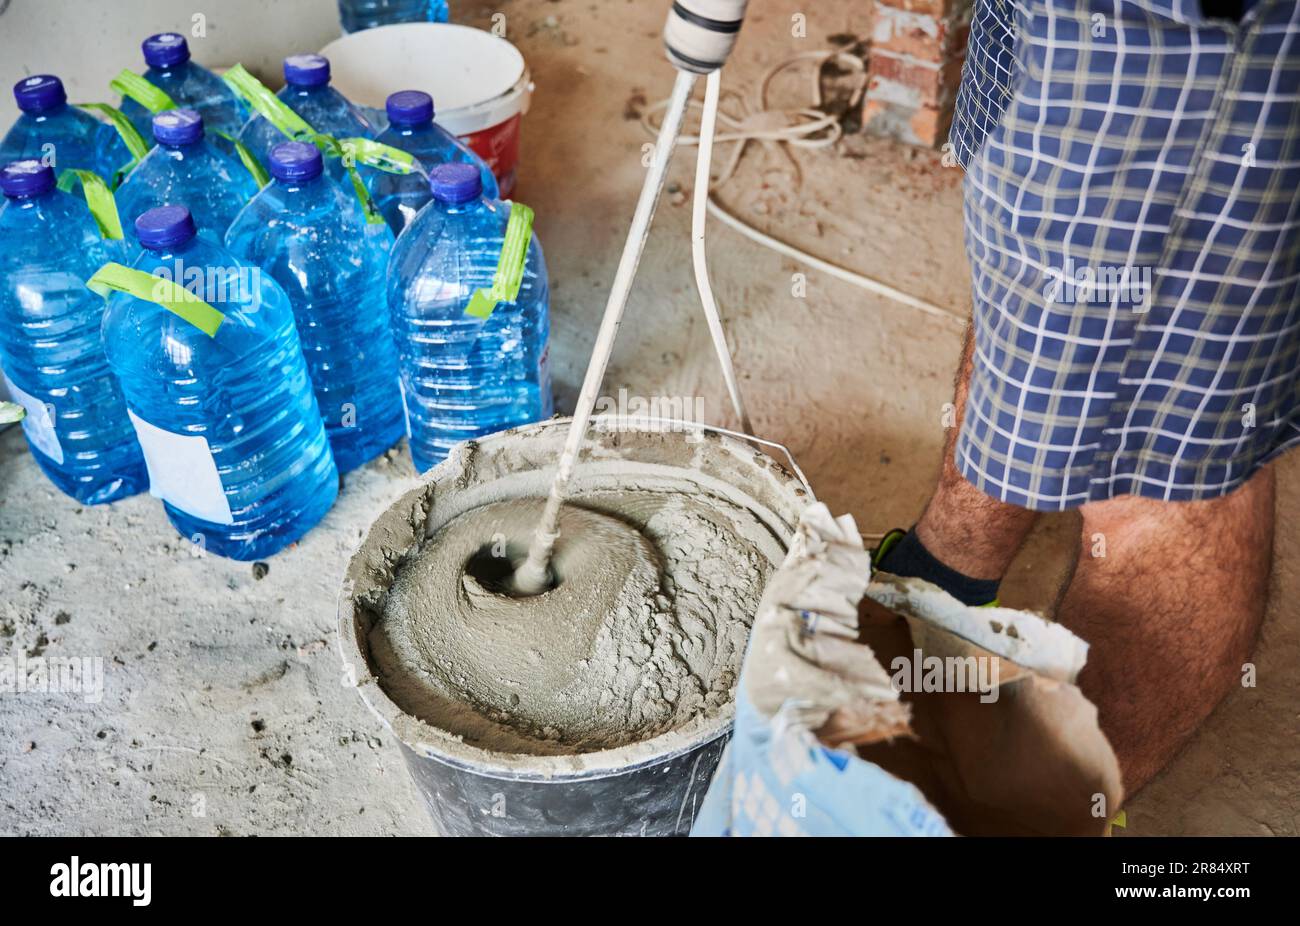 Bag of Portland Cement, mix with sand and water to make usable mixture.